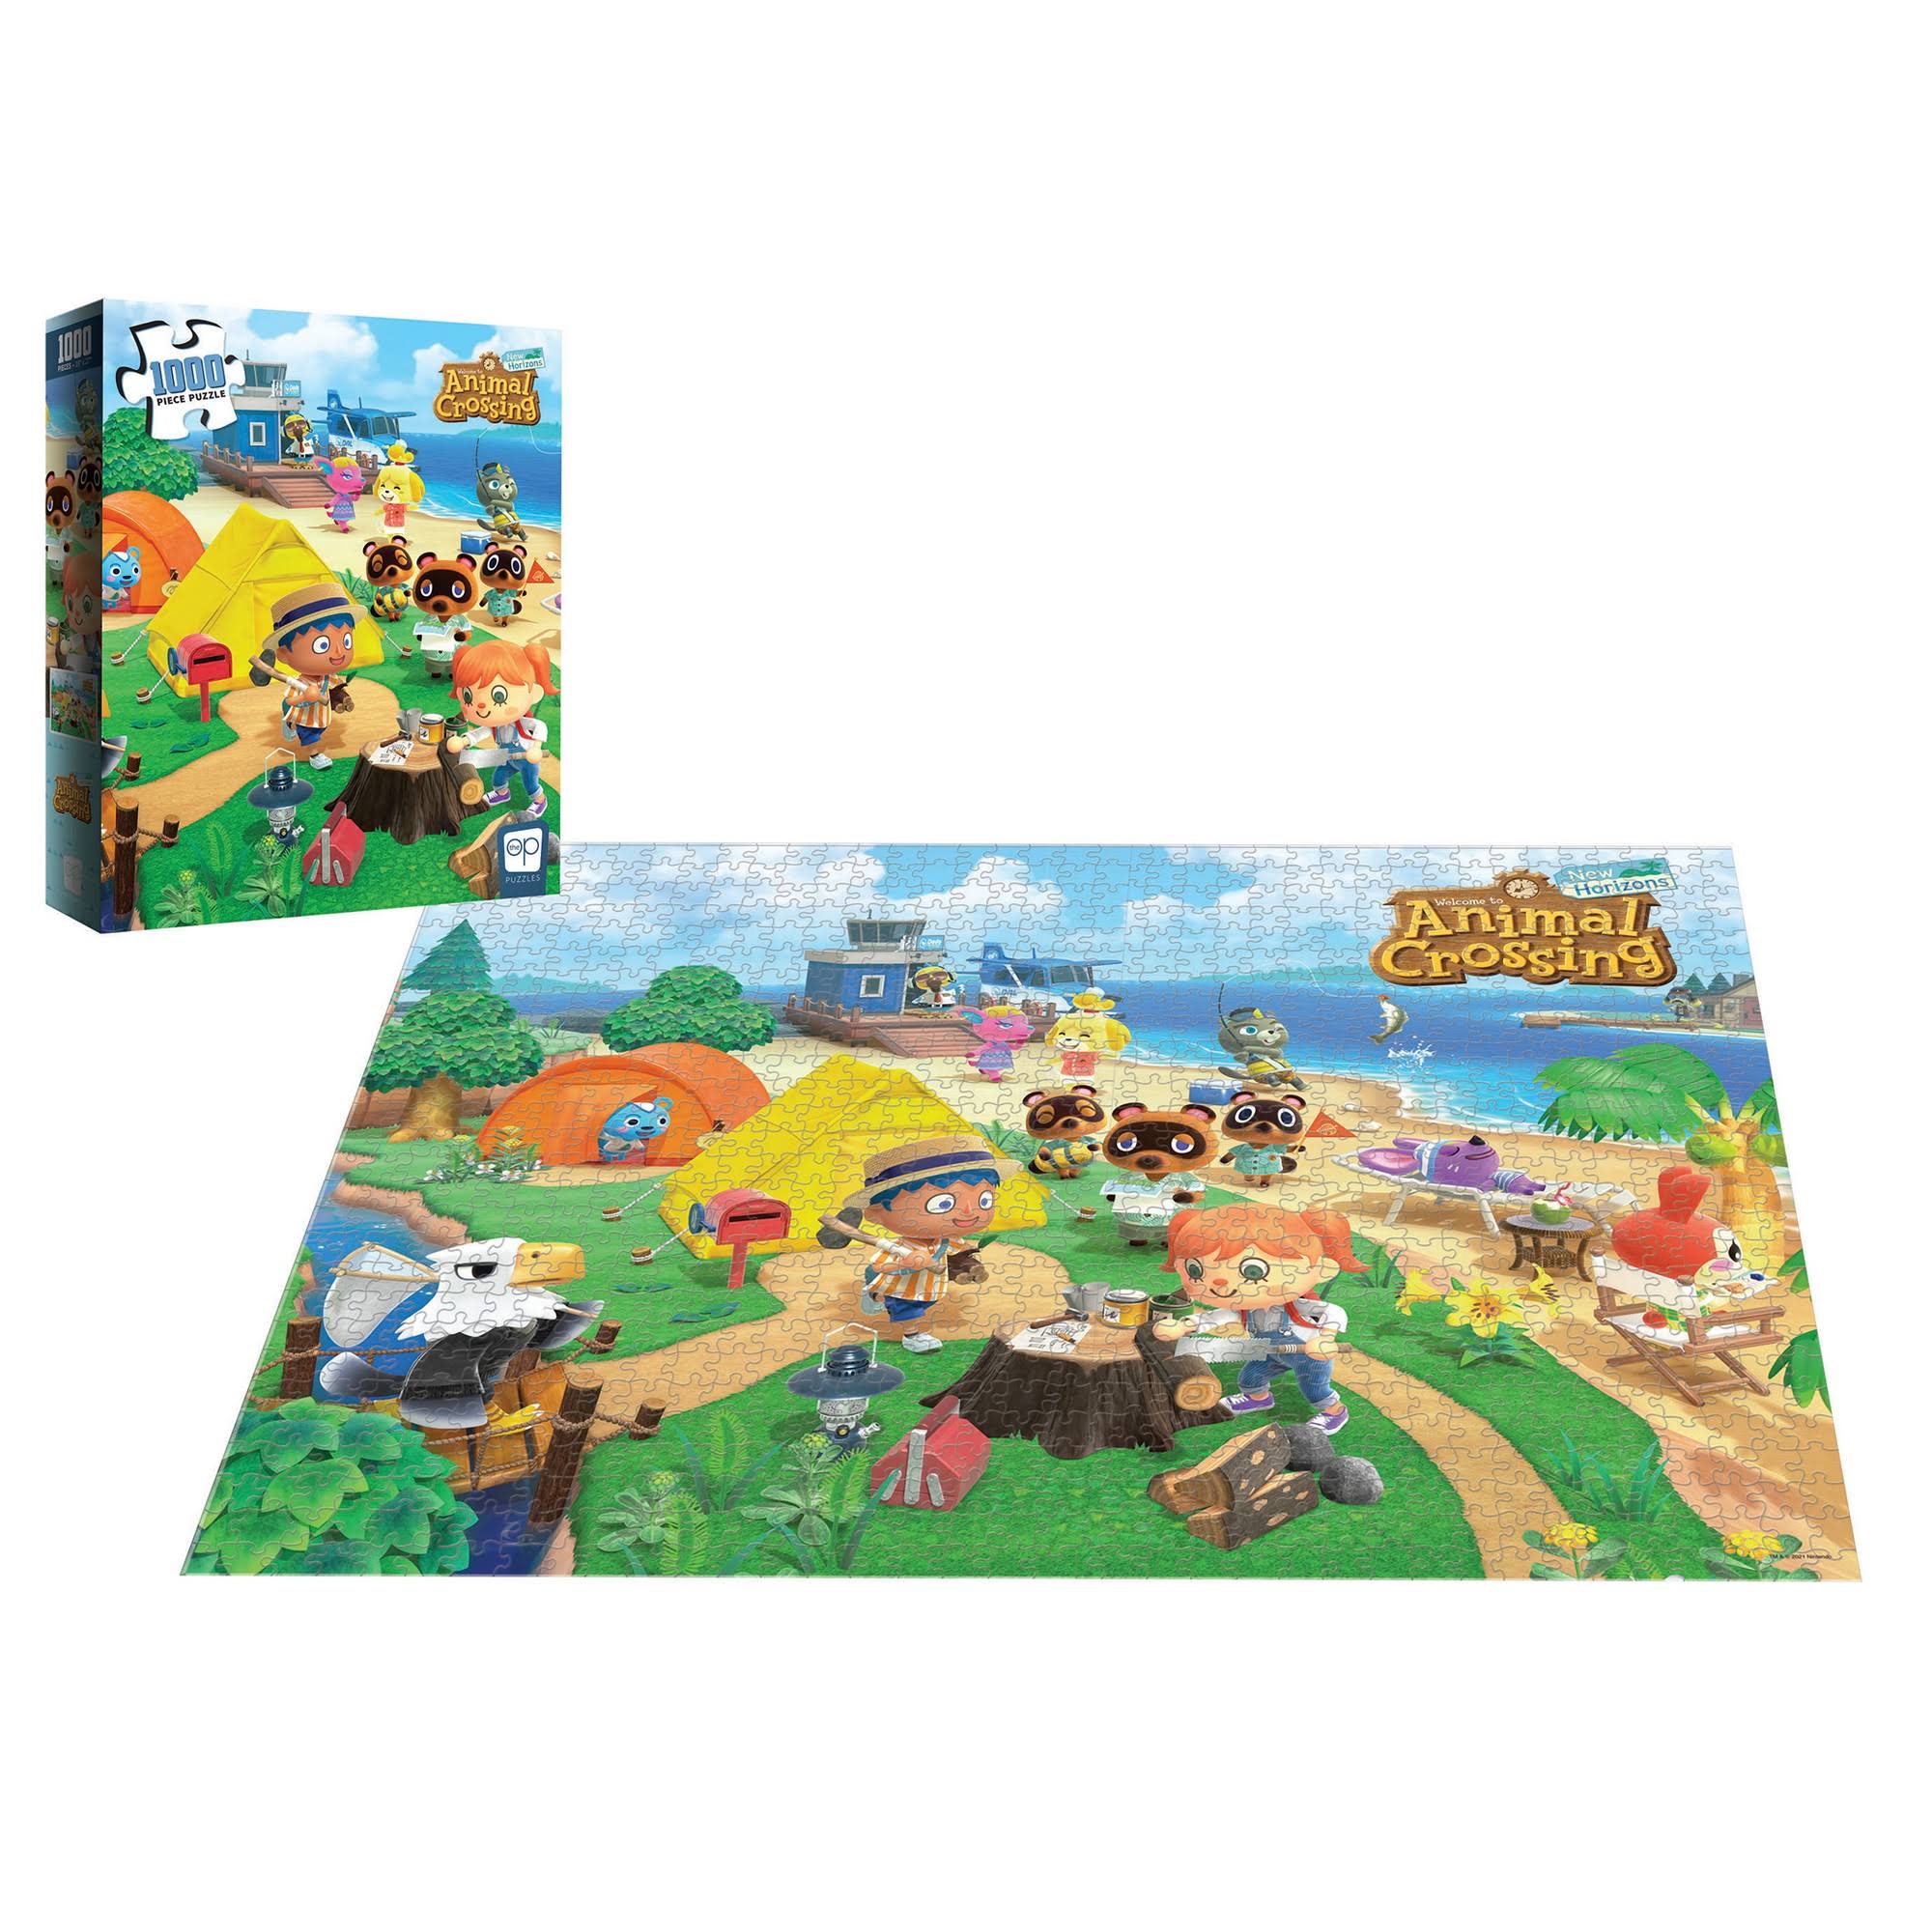 Animal Crossing New Horizons Jigsaw Puzzle Welcome to Animal Crossing